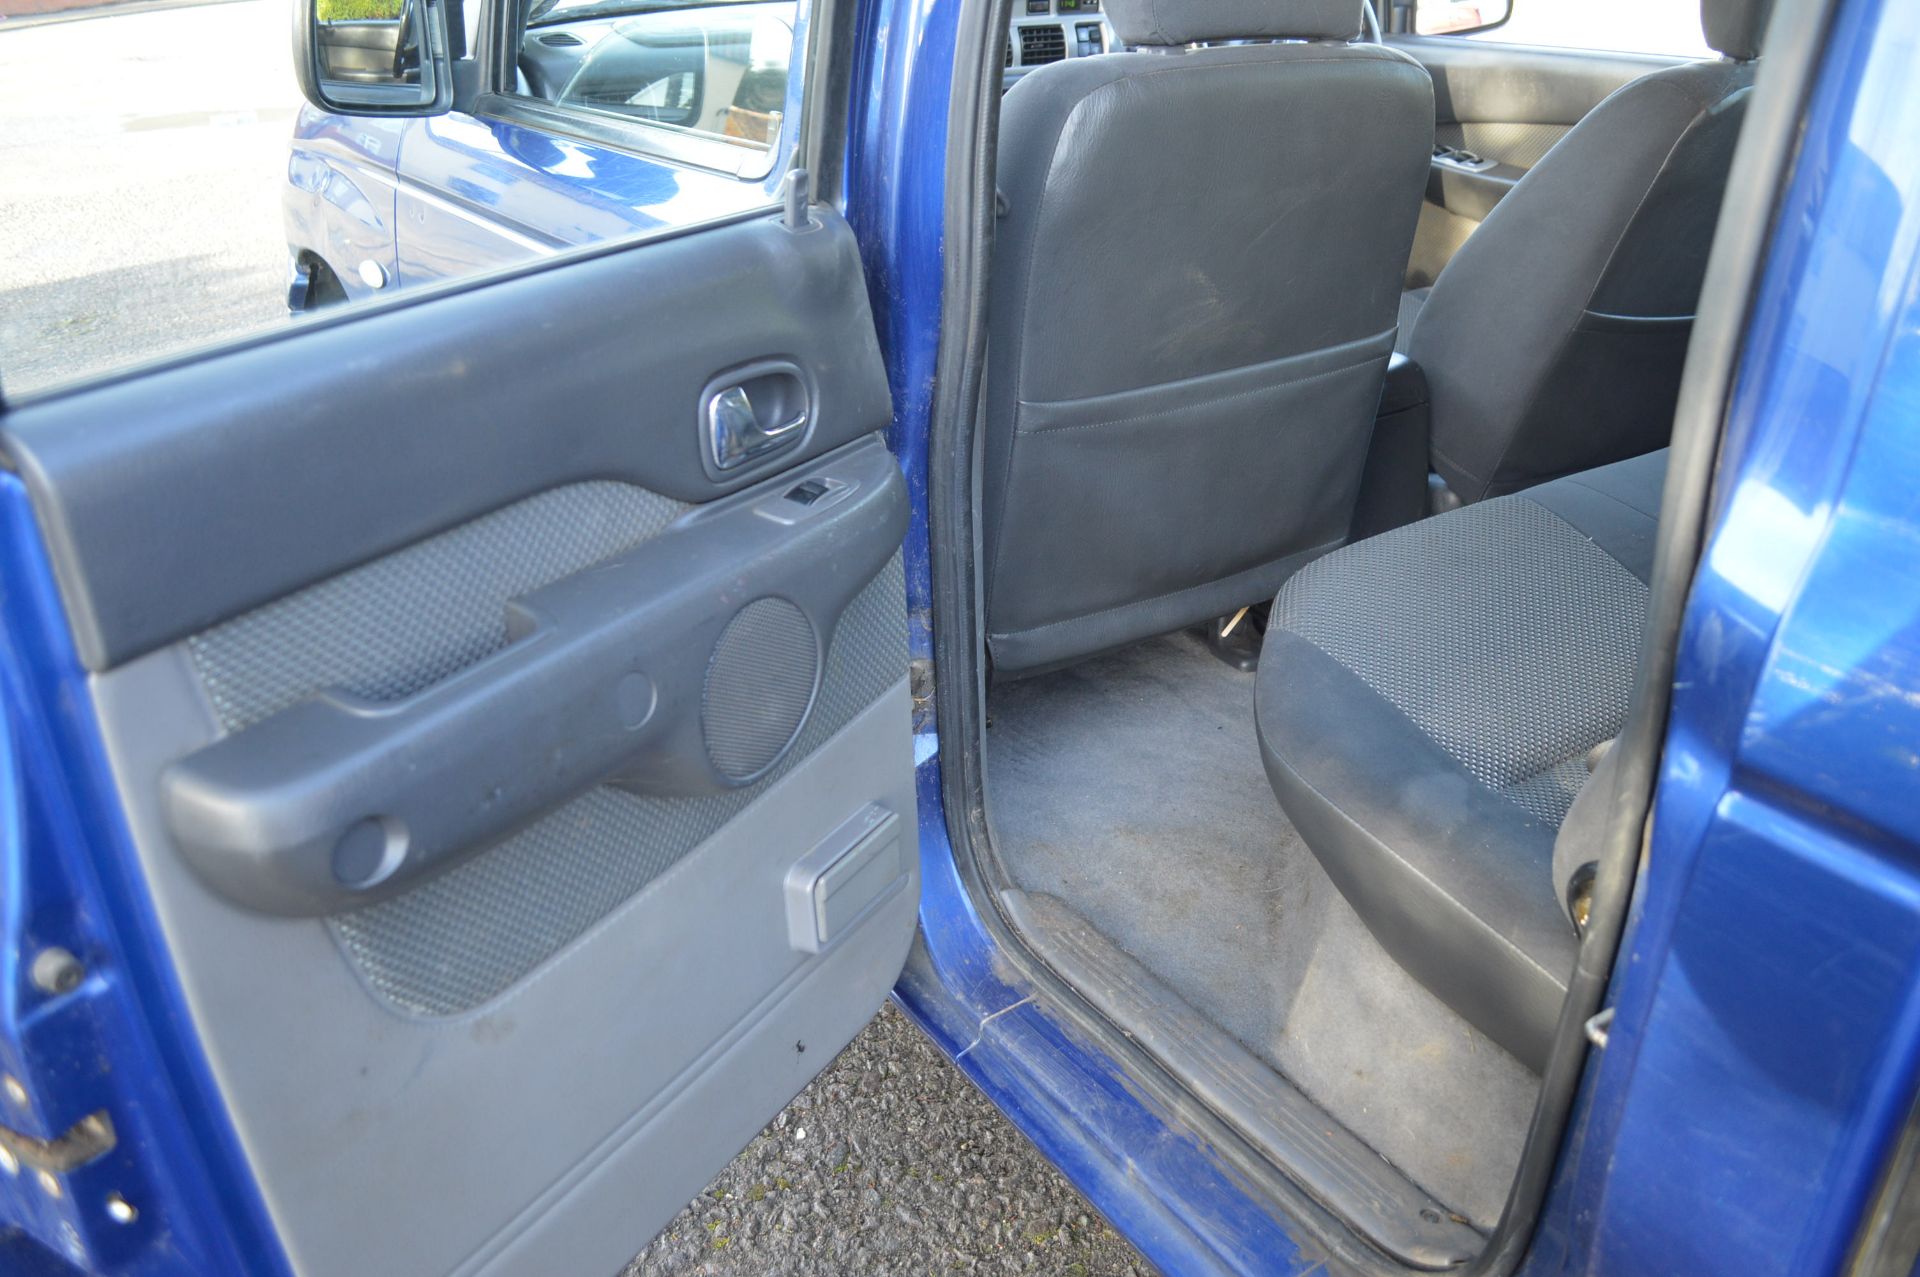 2005/05 REG BLUE MAZDA B2500 4X4 DOUBLE CAB TURBO DIESEL same ford ranger only cheaper! - Image 11 of 22